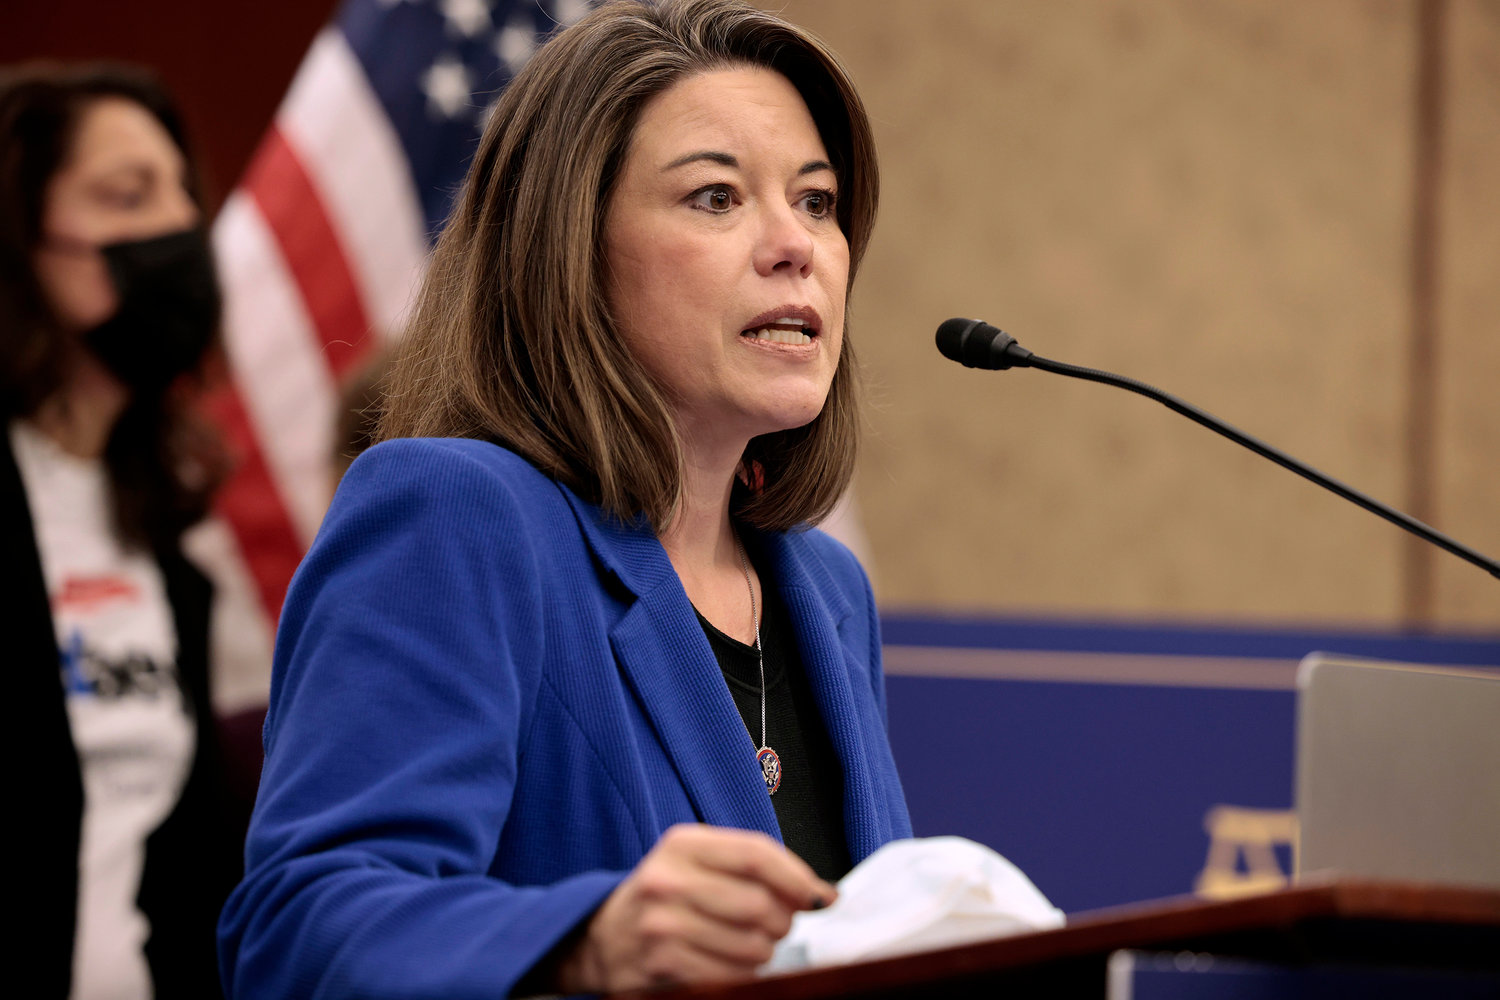 Rep. Angie Craig (D-Minnesota) speaks at a press conference at the U.S. Capitol Building on Dec. 14, 2021, in Washington, D.C. (Anna Moneymaker/Getty Images/TNS)